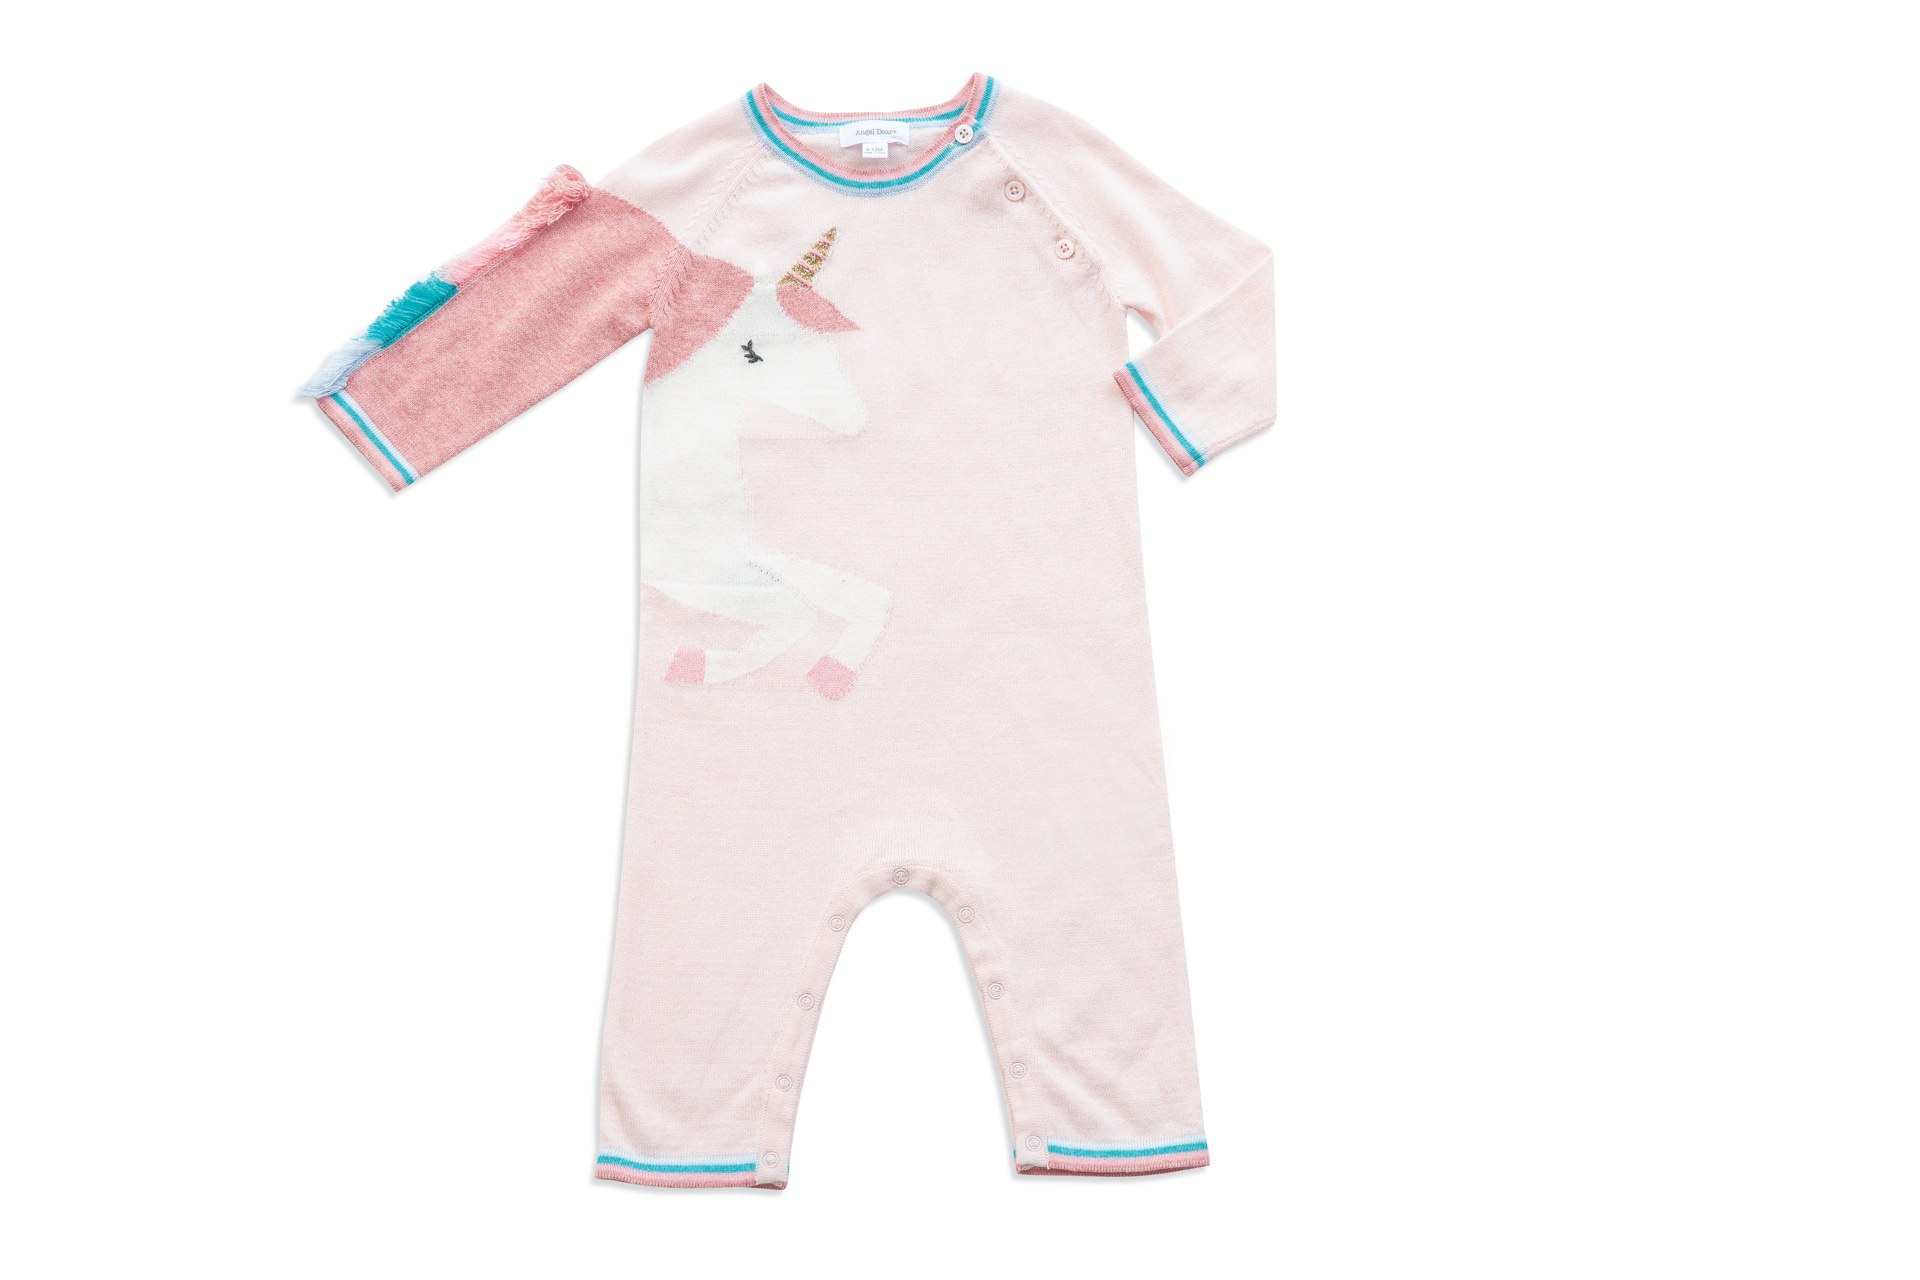 Angel Dear Cosmic Wonder Knits Unicorn Coverall in 6-12 Months